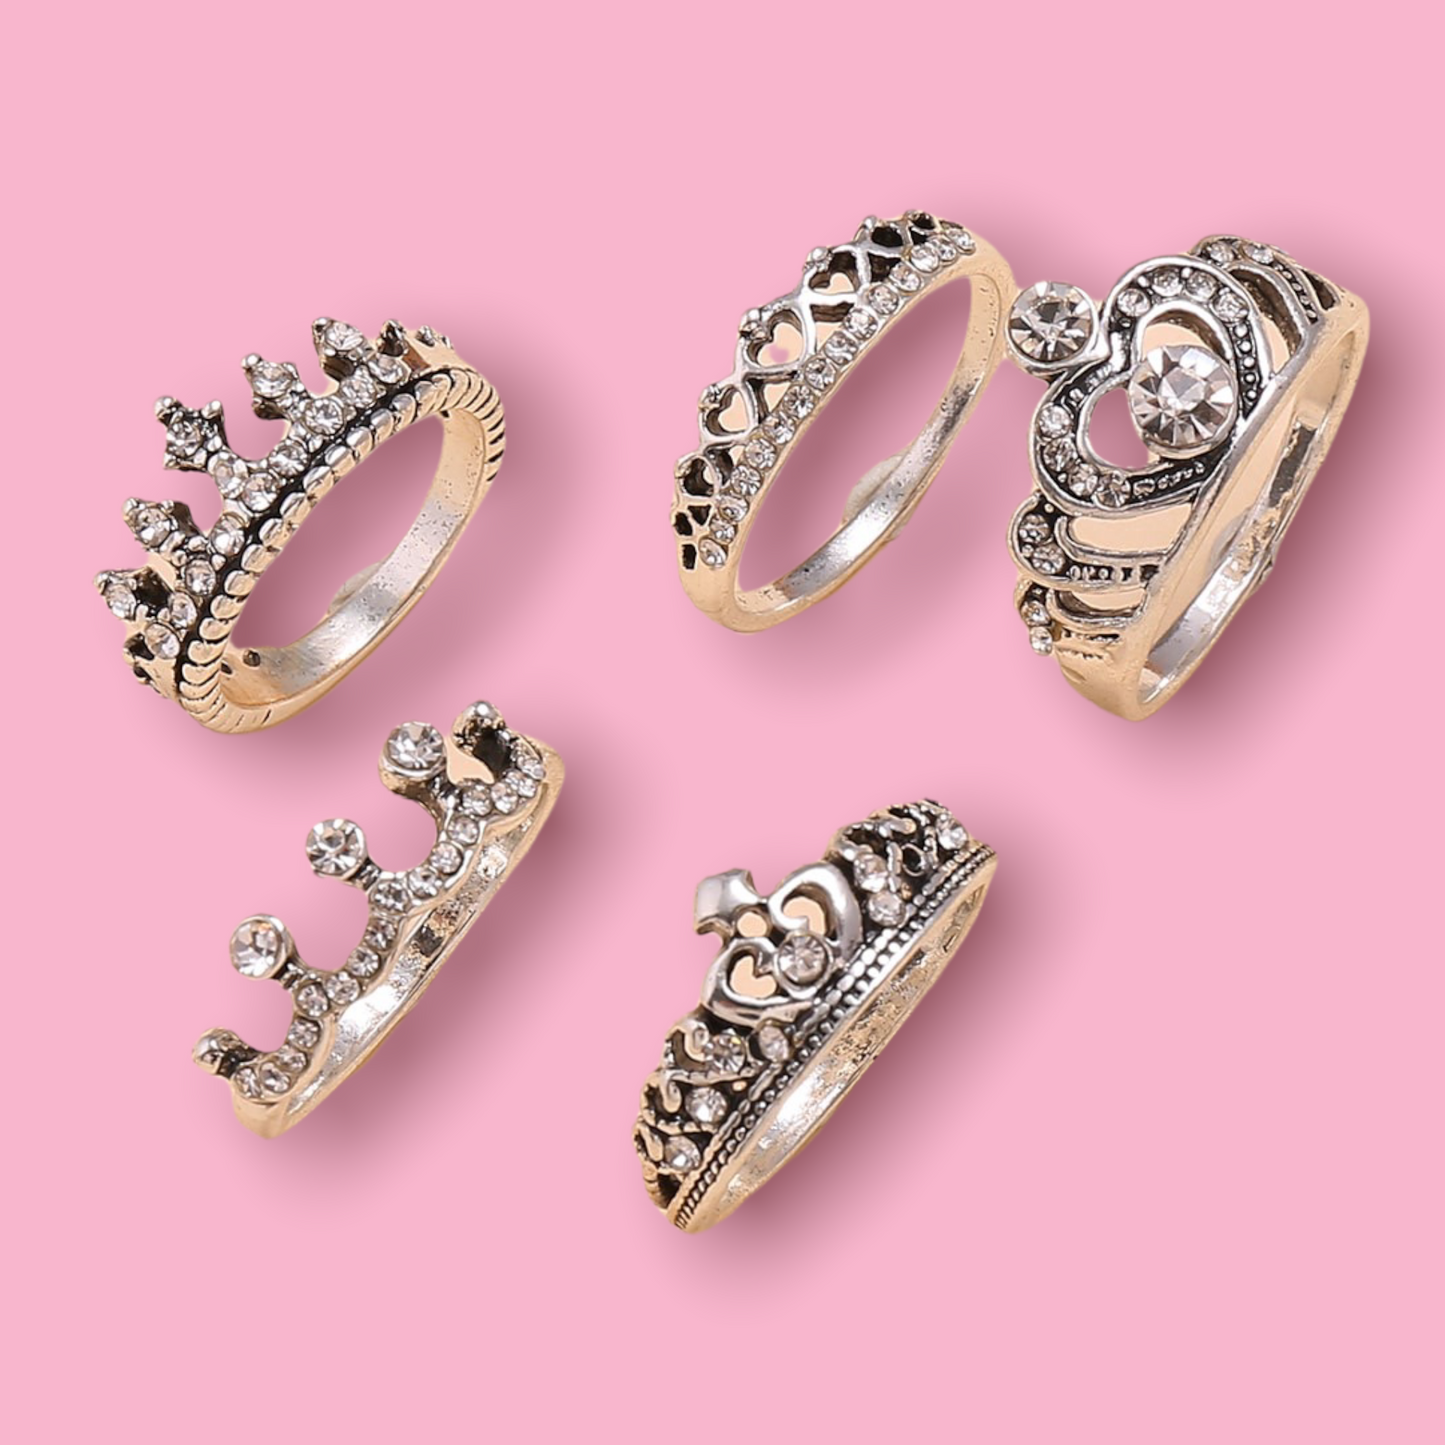 The Princess Collection Set Of 5 Rings